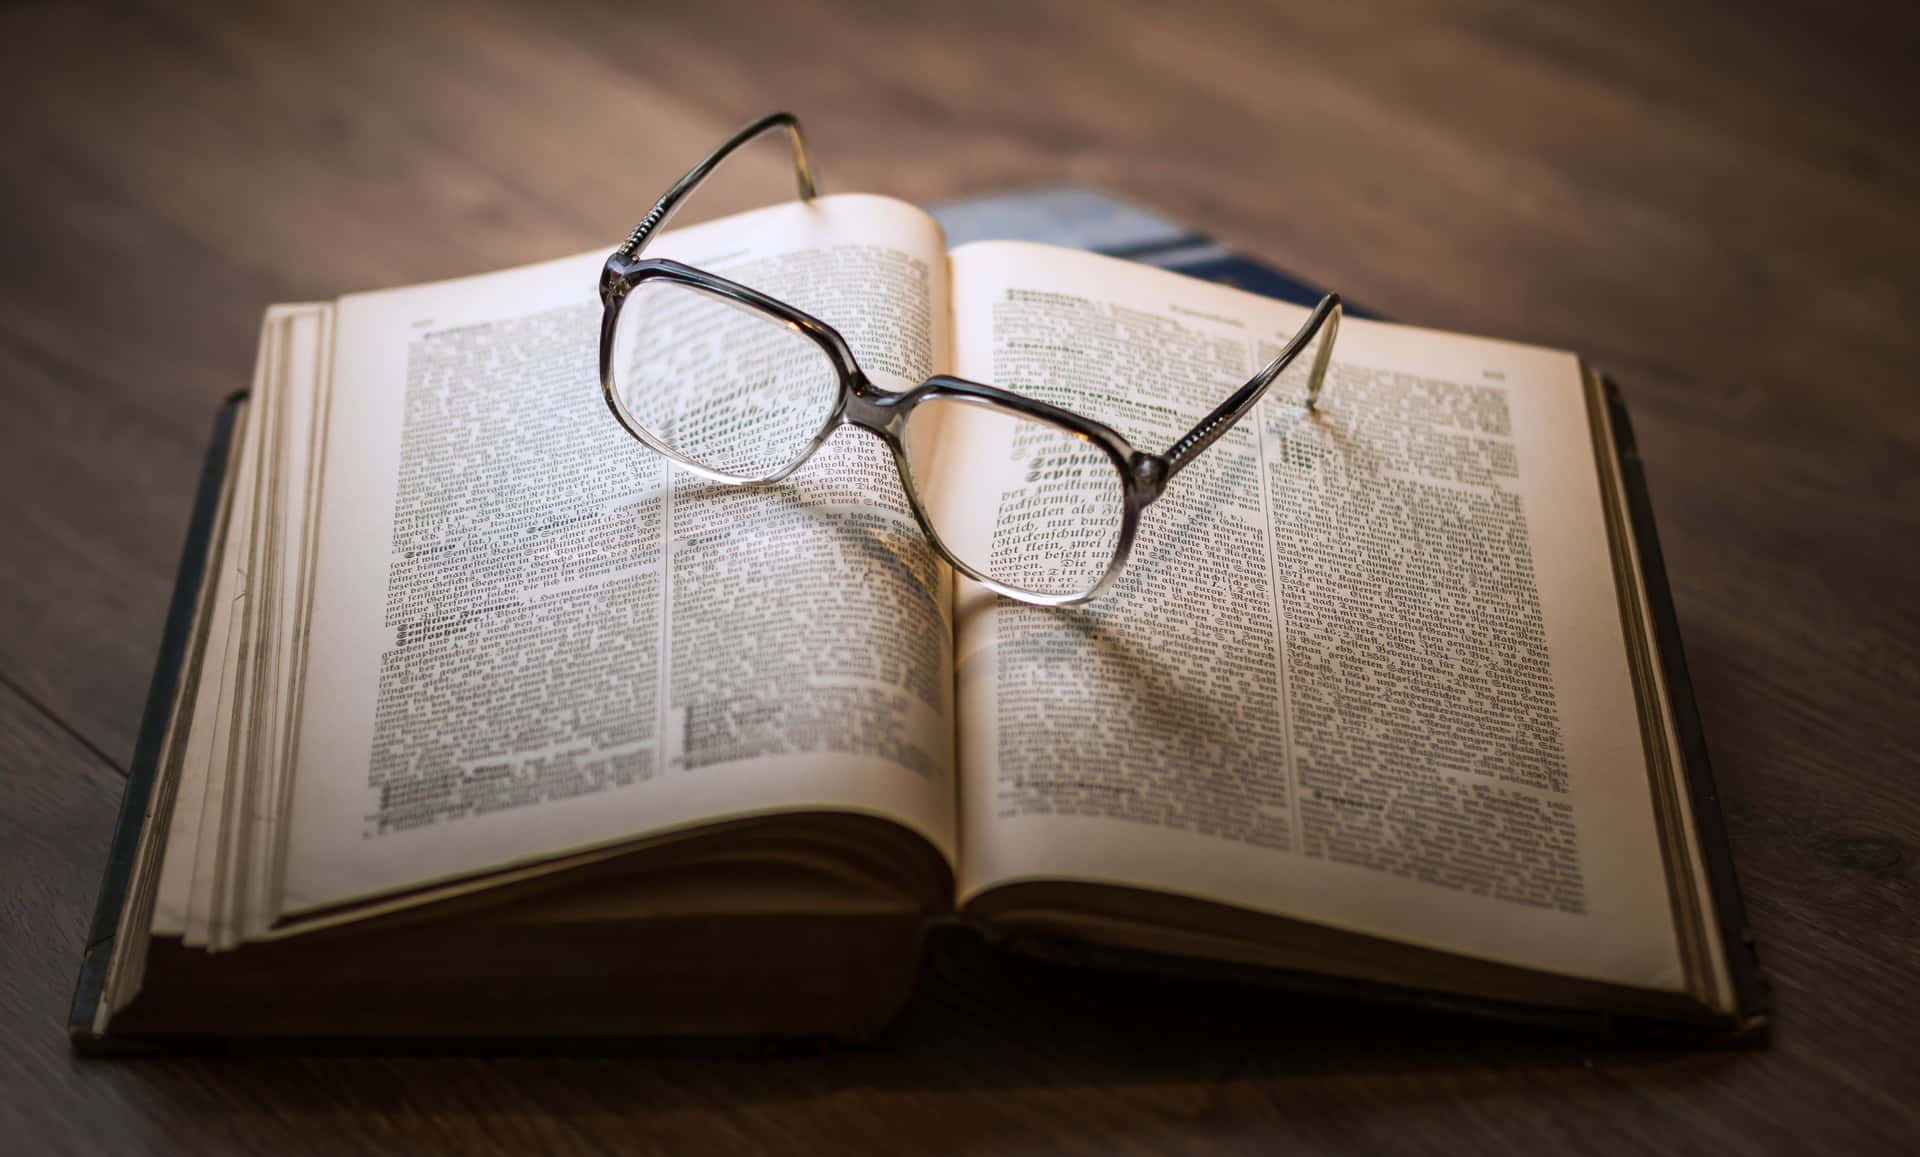 A Pair Of Glasses On An Open Book